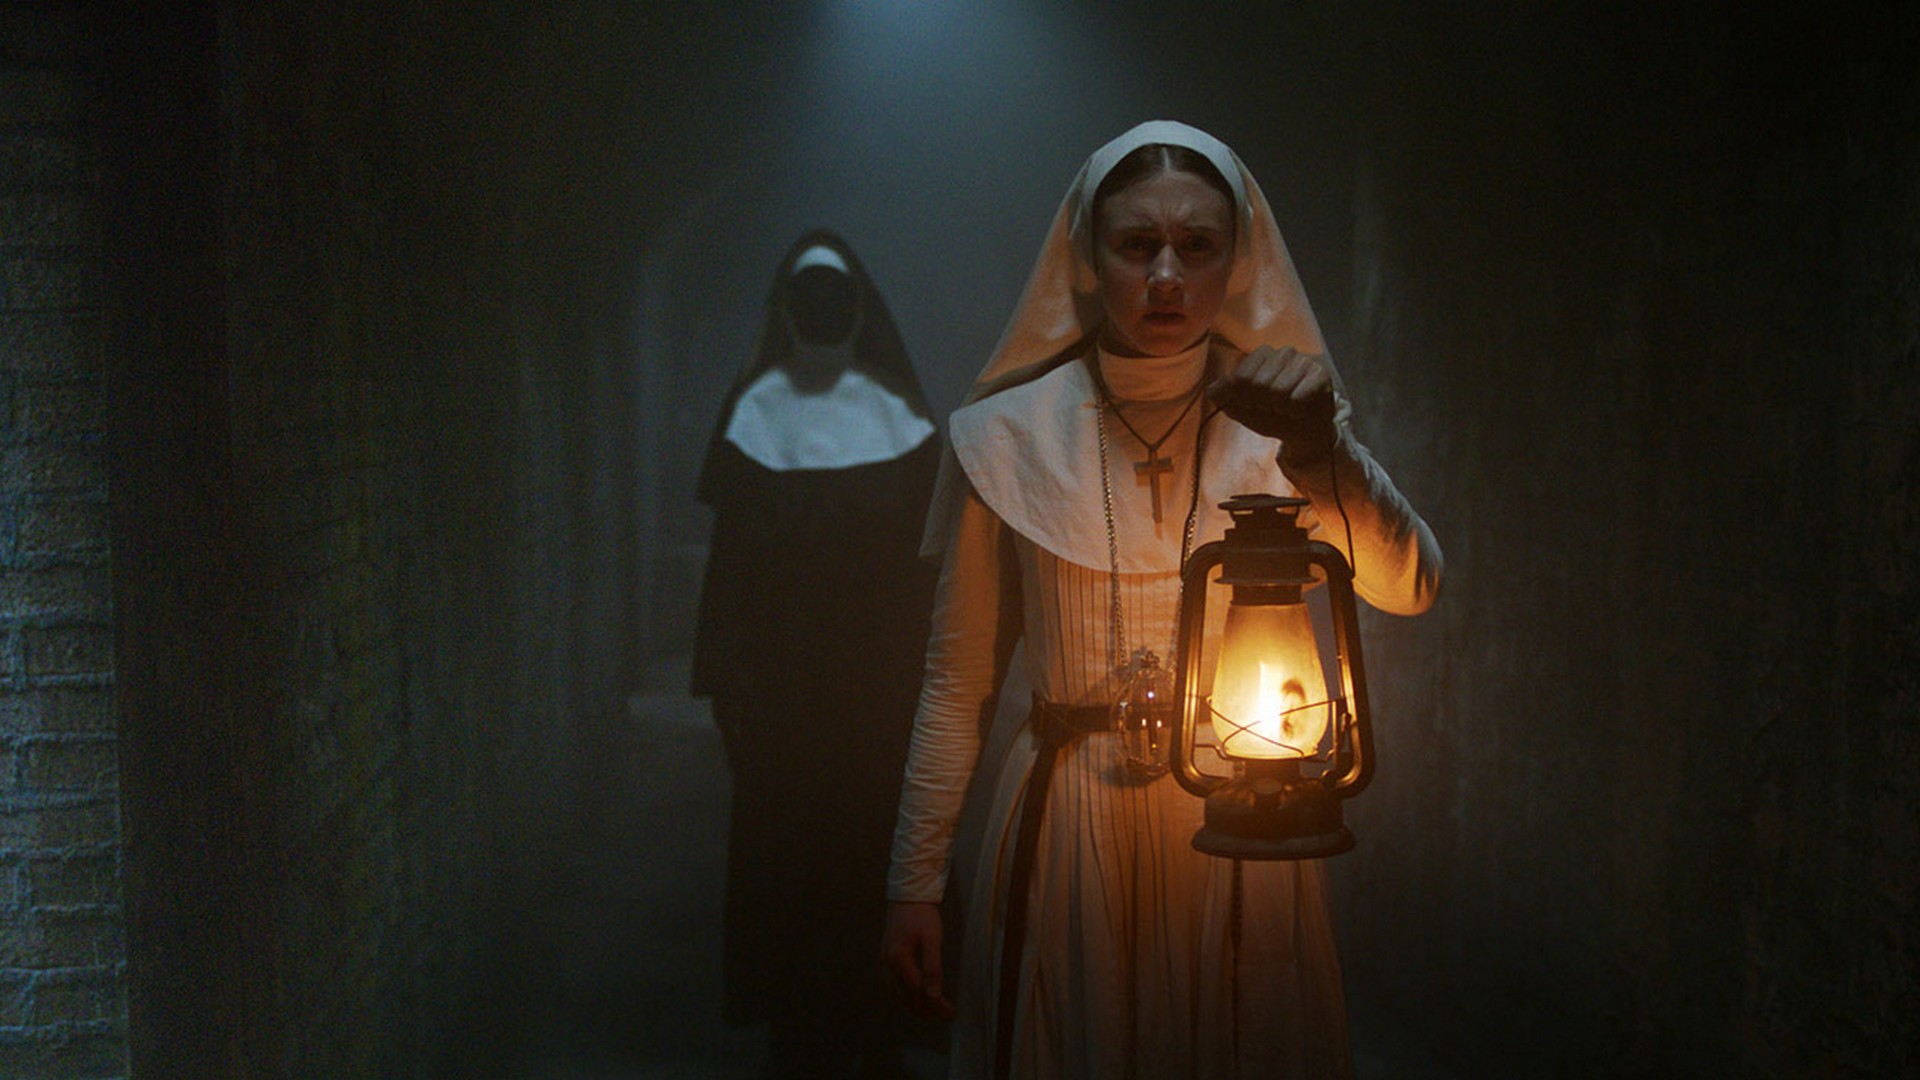 The Nun Poster Wallpaper with image resolution 1920x1080 pixel. You can use this wallpaper as background for your desktop Computer Screensavers, Android or iPhone smartphones